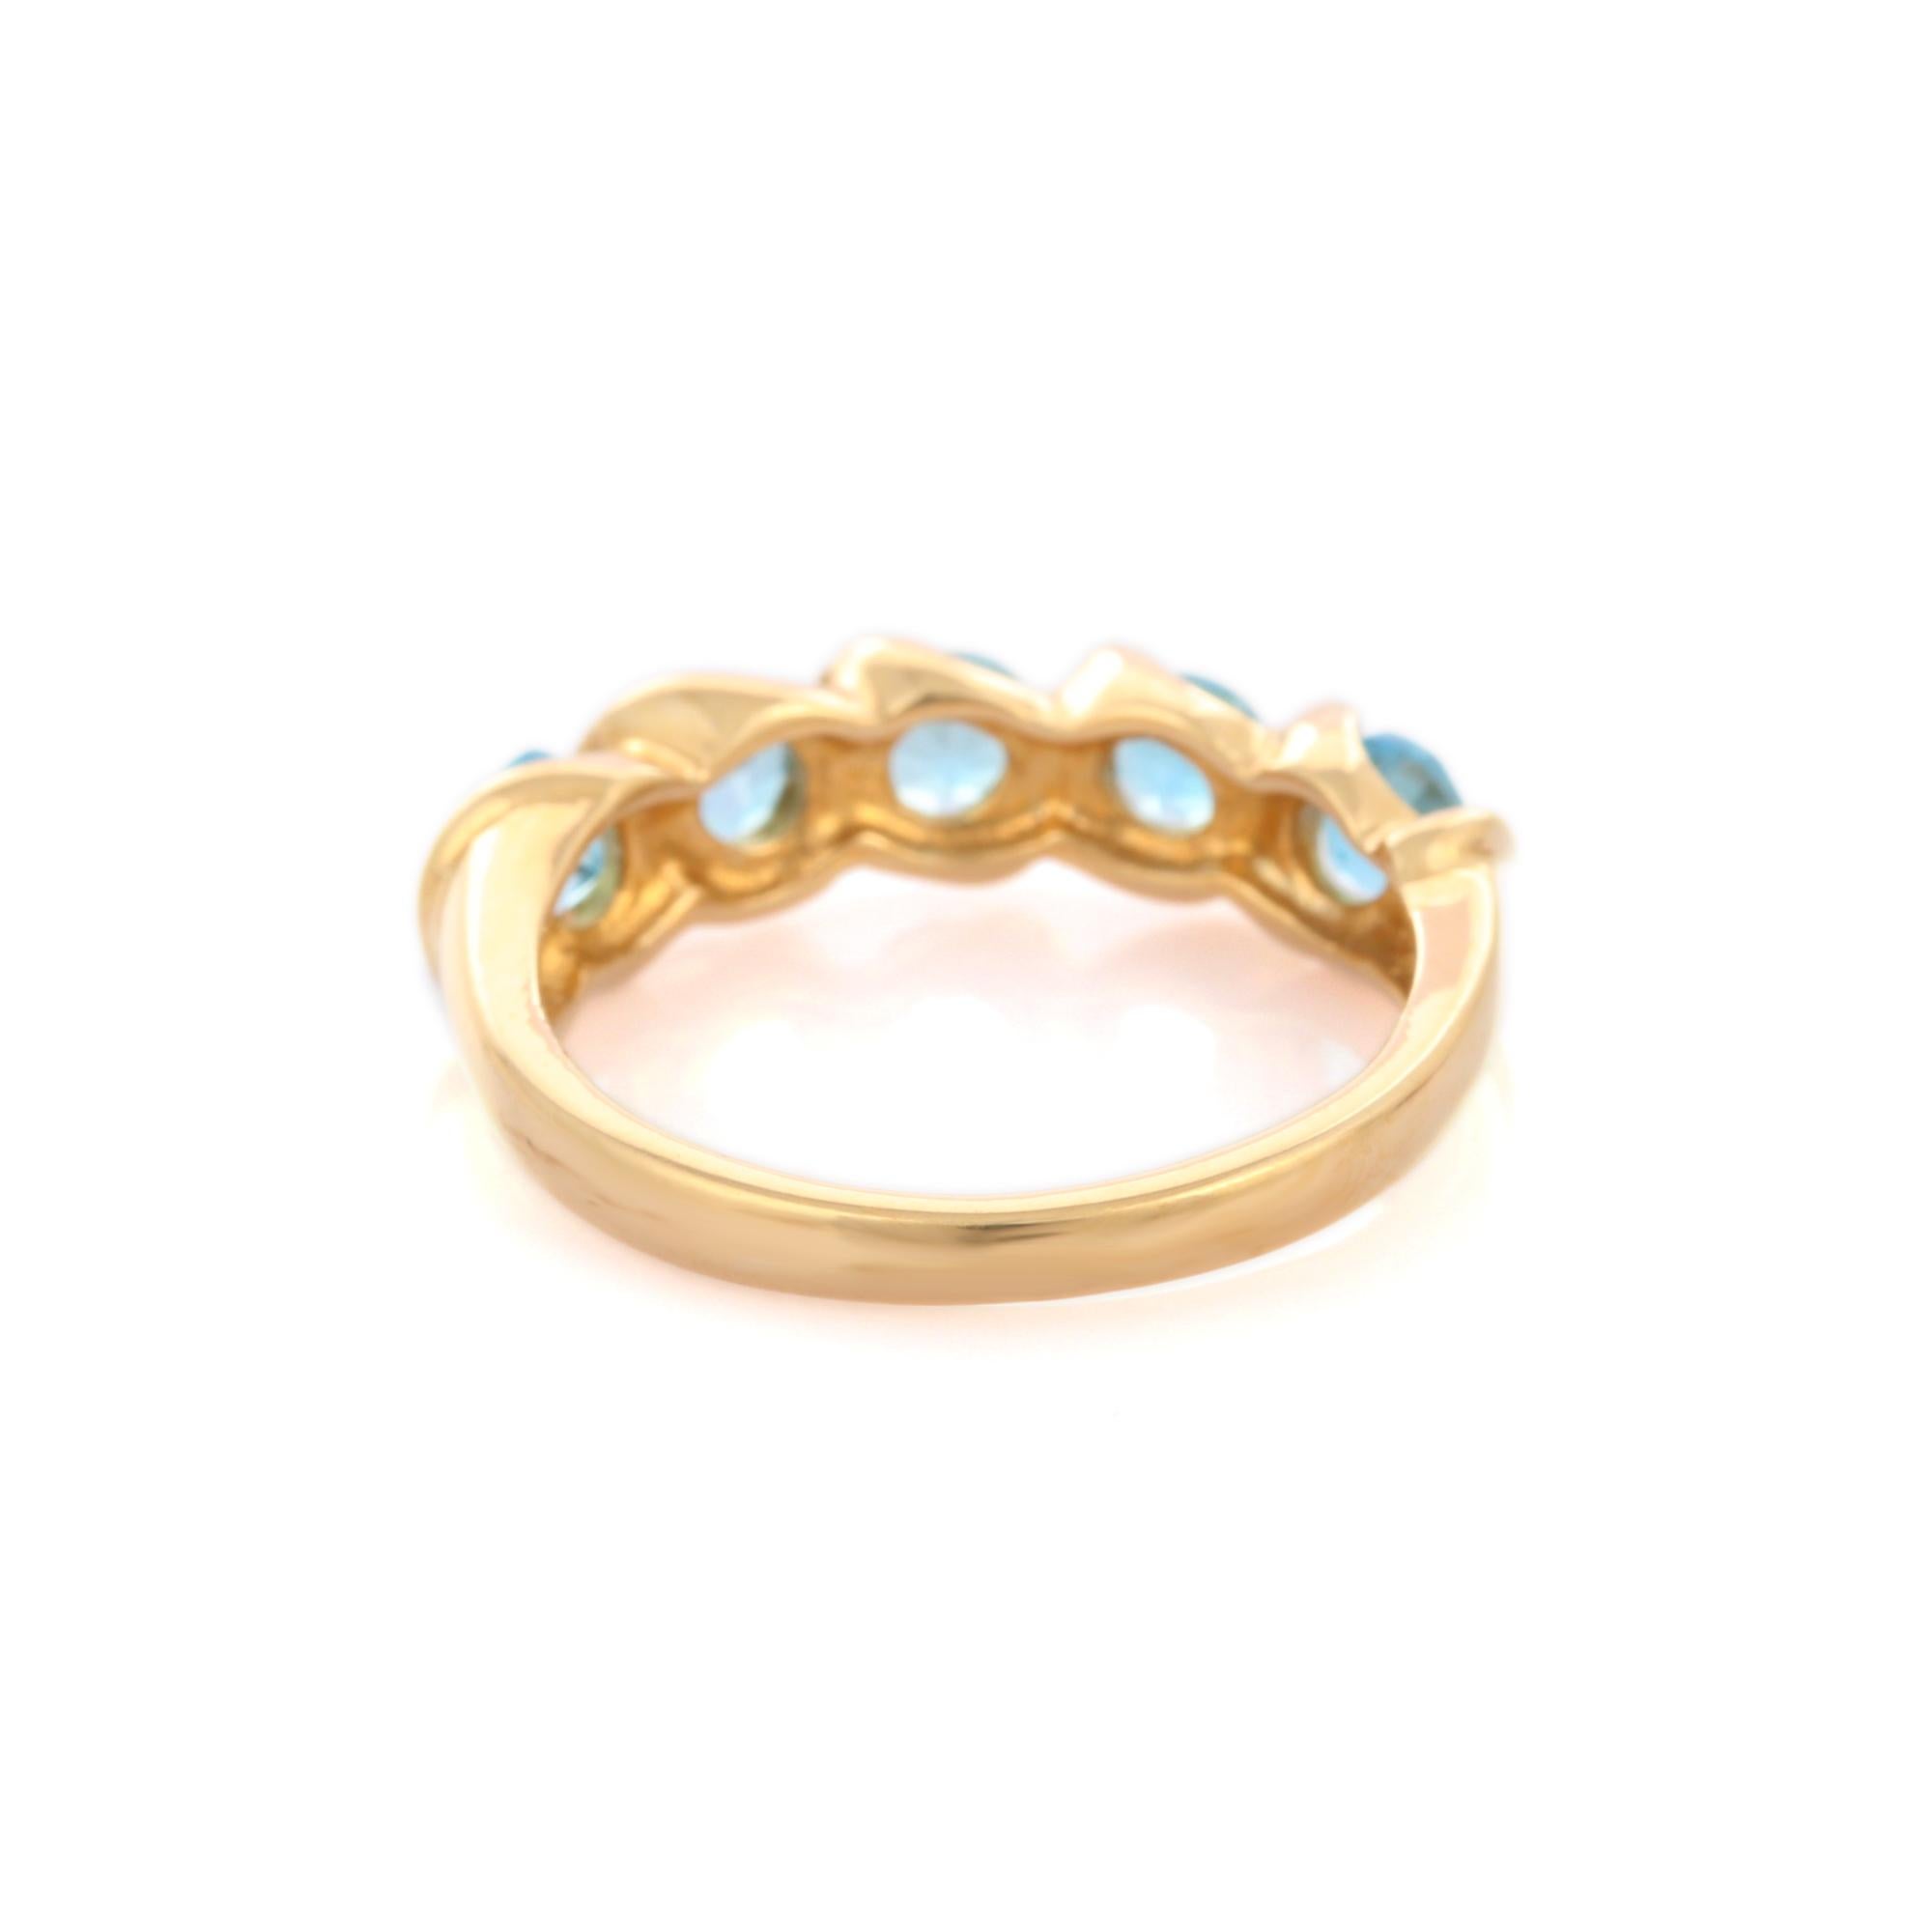 For Sale:  Blue Topaz Band Ring in 14k Solid Yellow Gold, December Birthstone Band 5